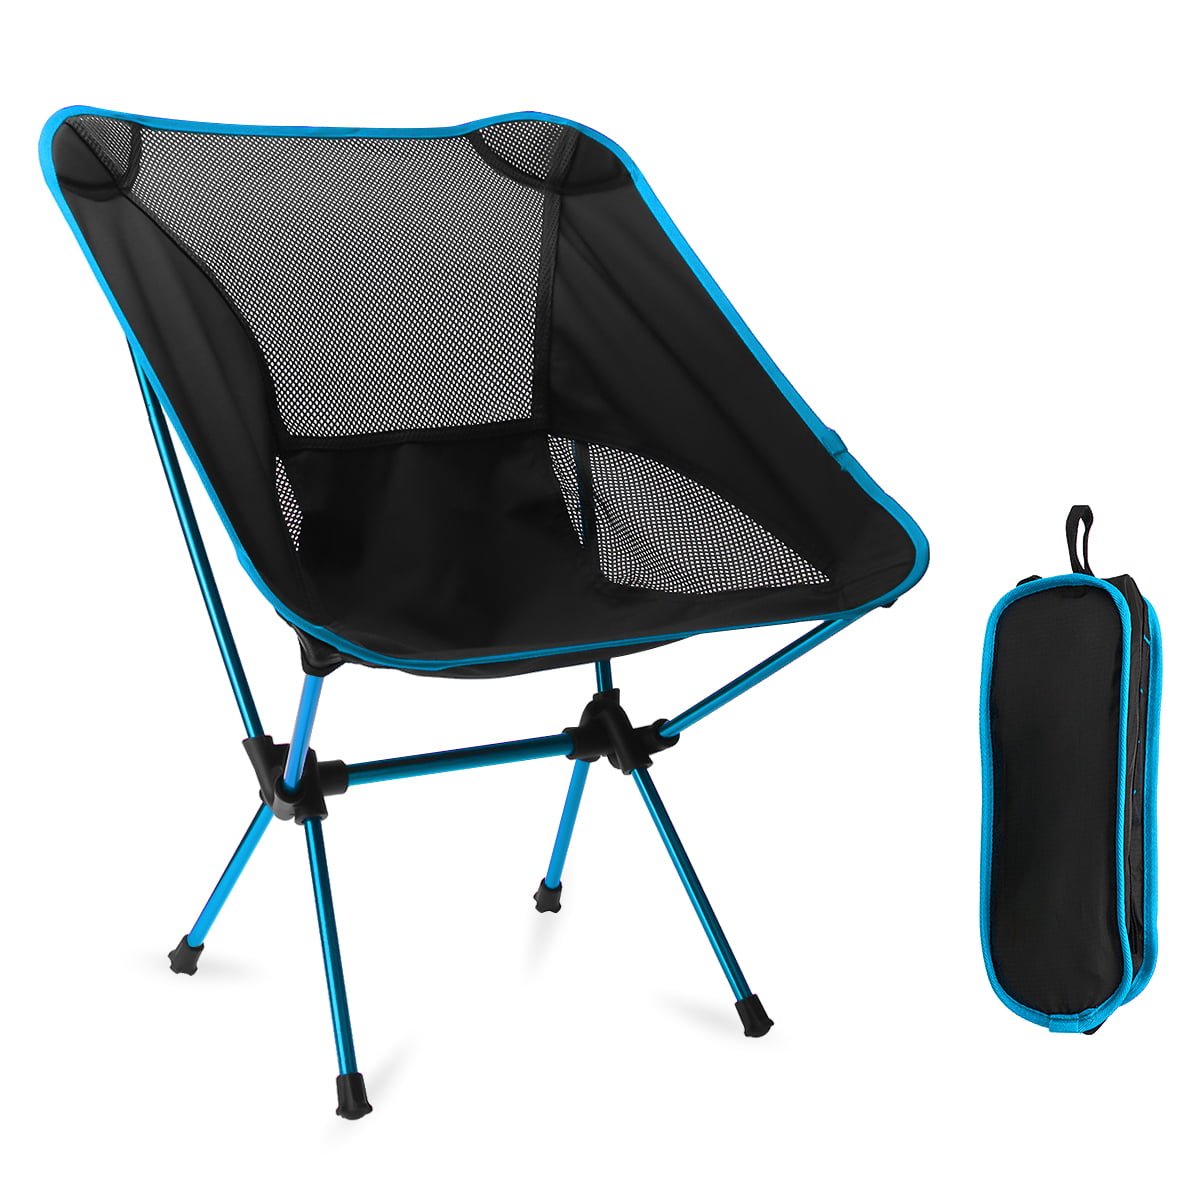 BBQ,Beach miuse Ultralight Backpacking Camping Chair,portable Folding Compact Camping Chair for Outdoor Camping Picnic Backpacking Hiking